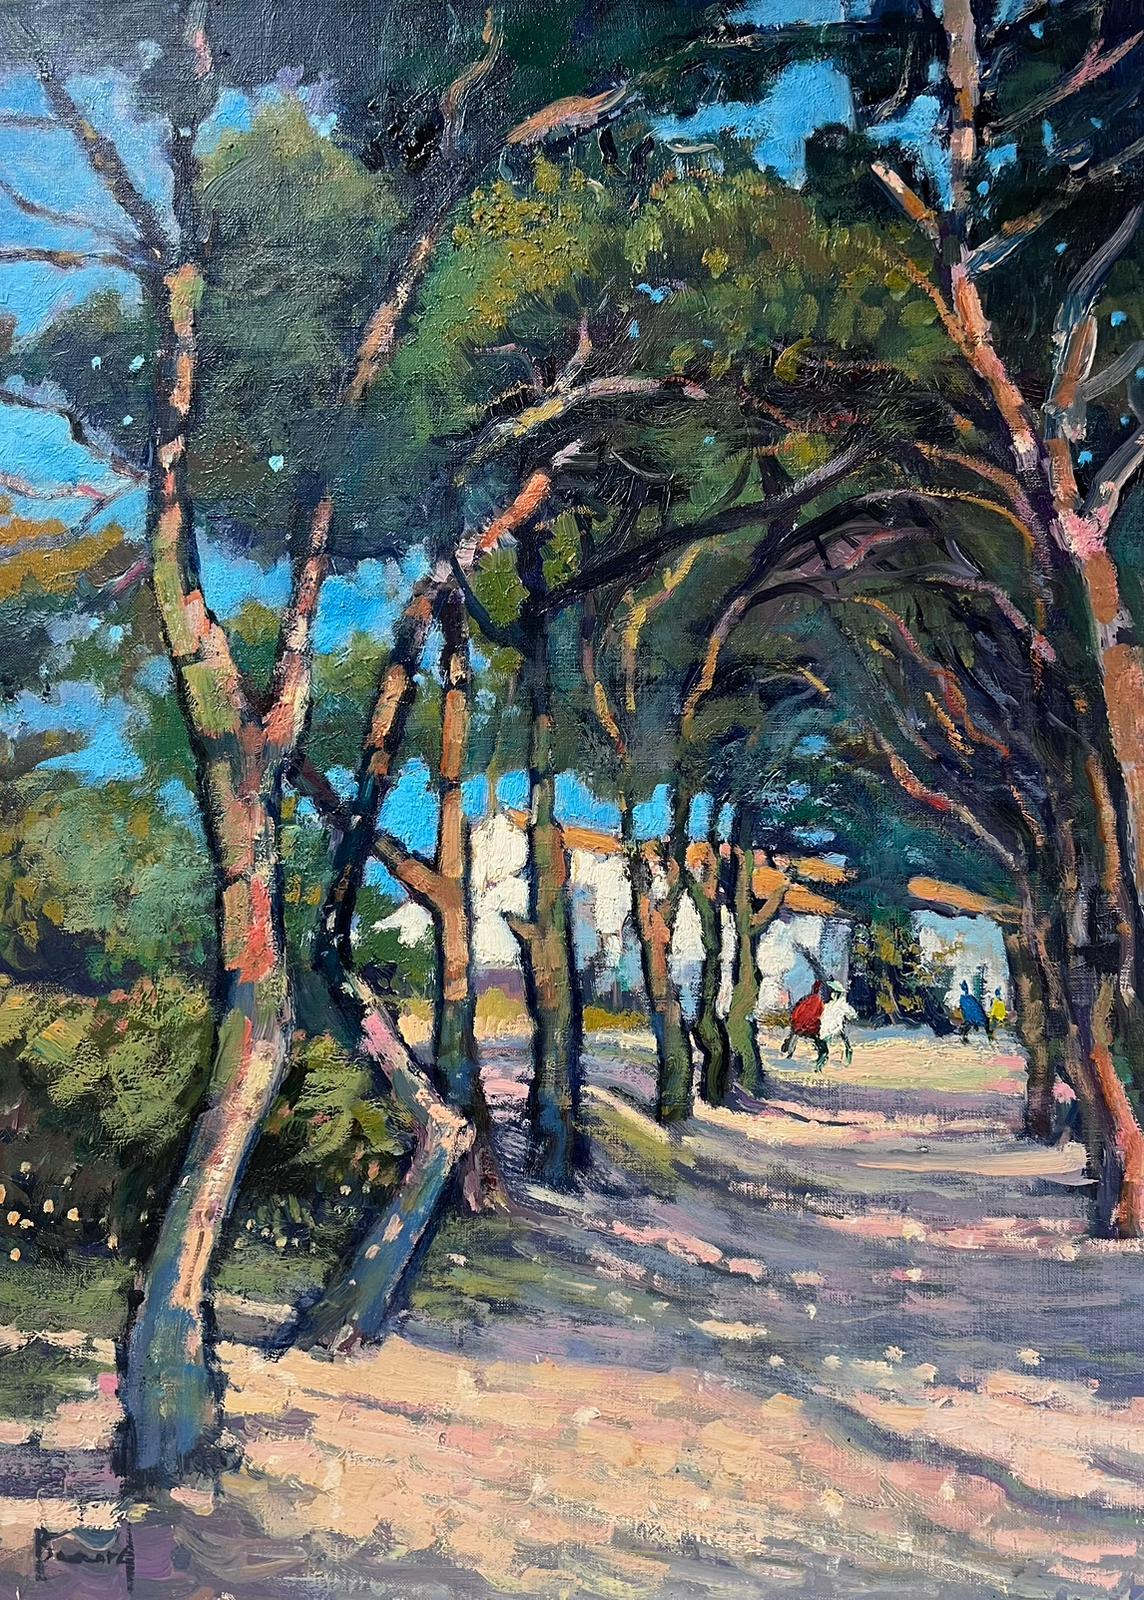 Figurative Painting Guy Benard - Southern France Summer Scorching Landscape Agde Post Impressionist French Oil 